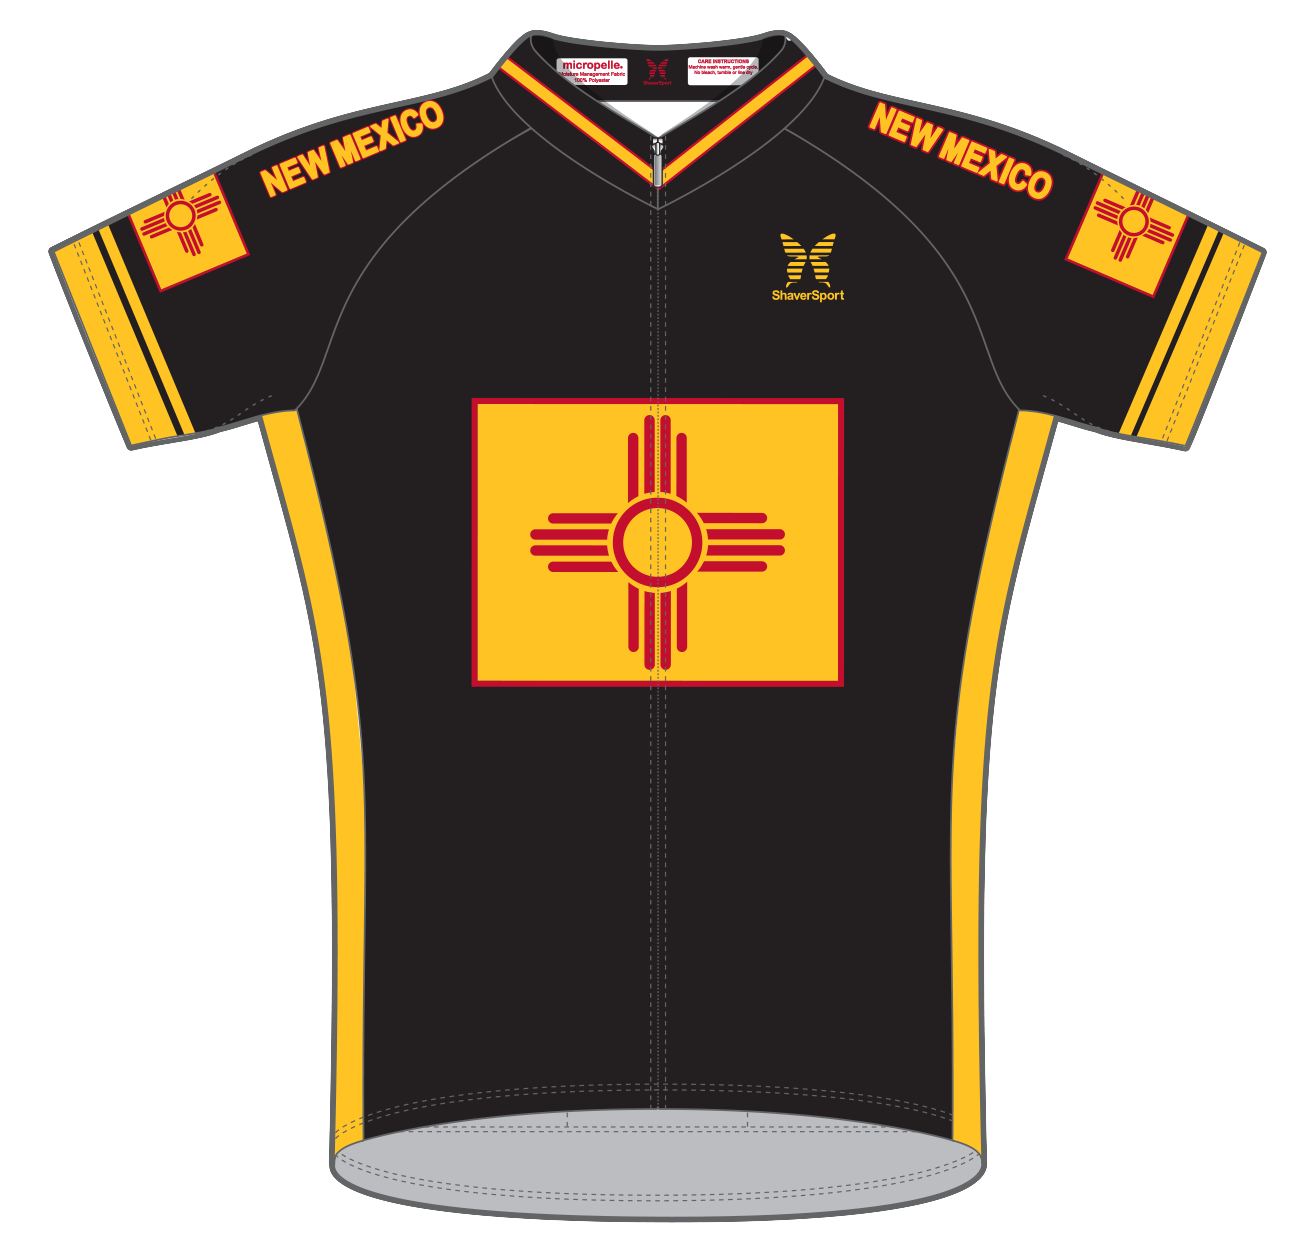 shaversport cycling jersey